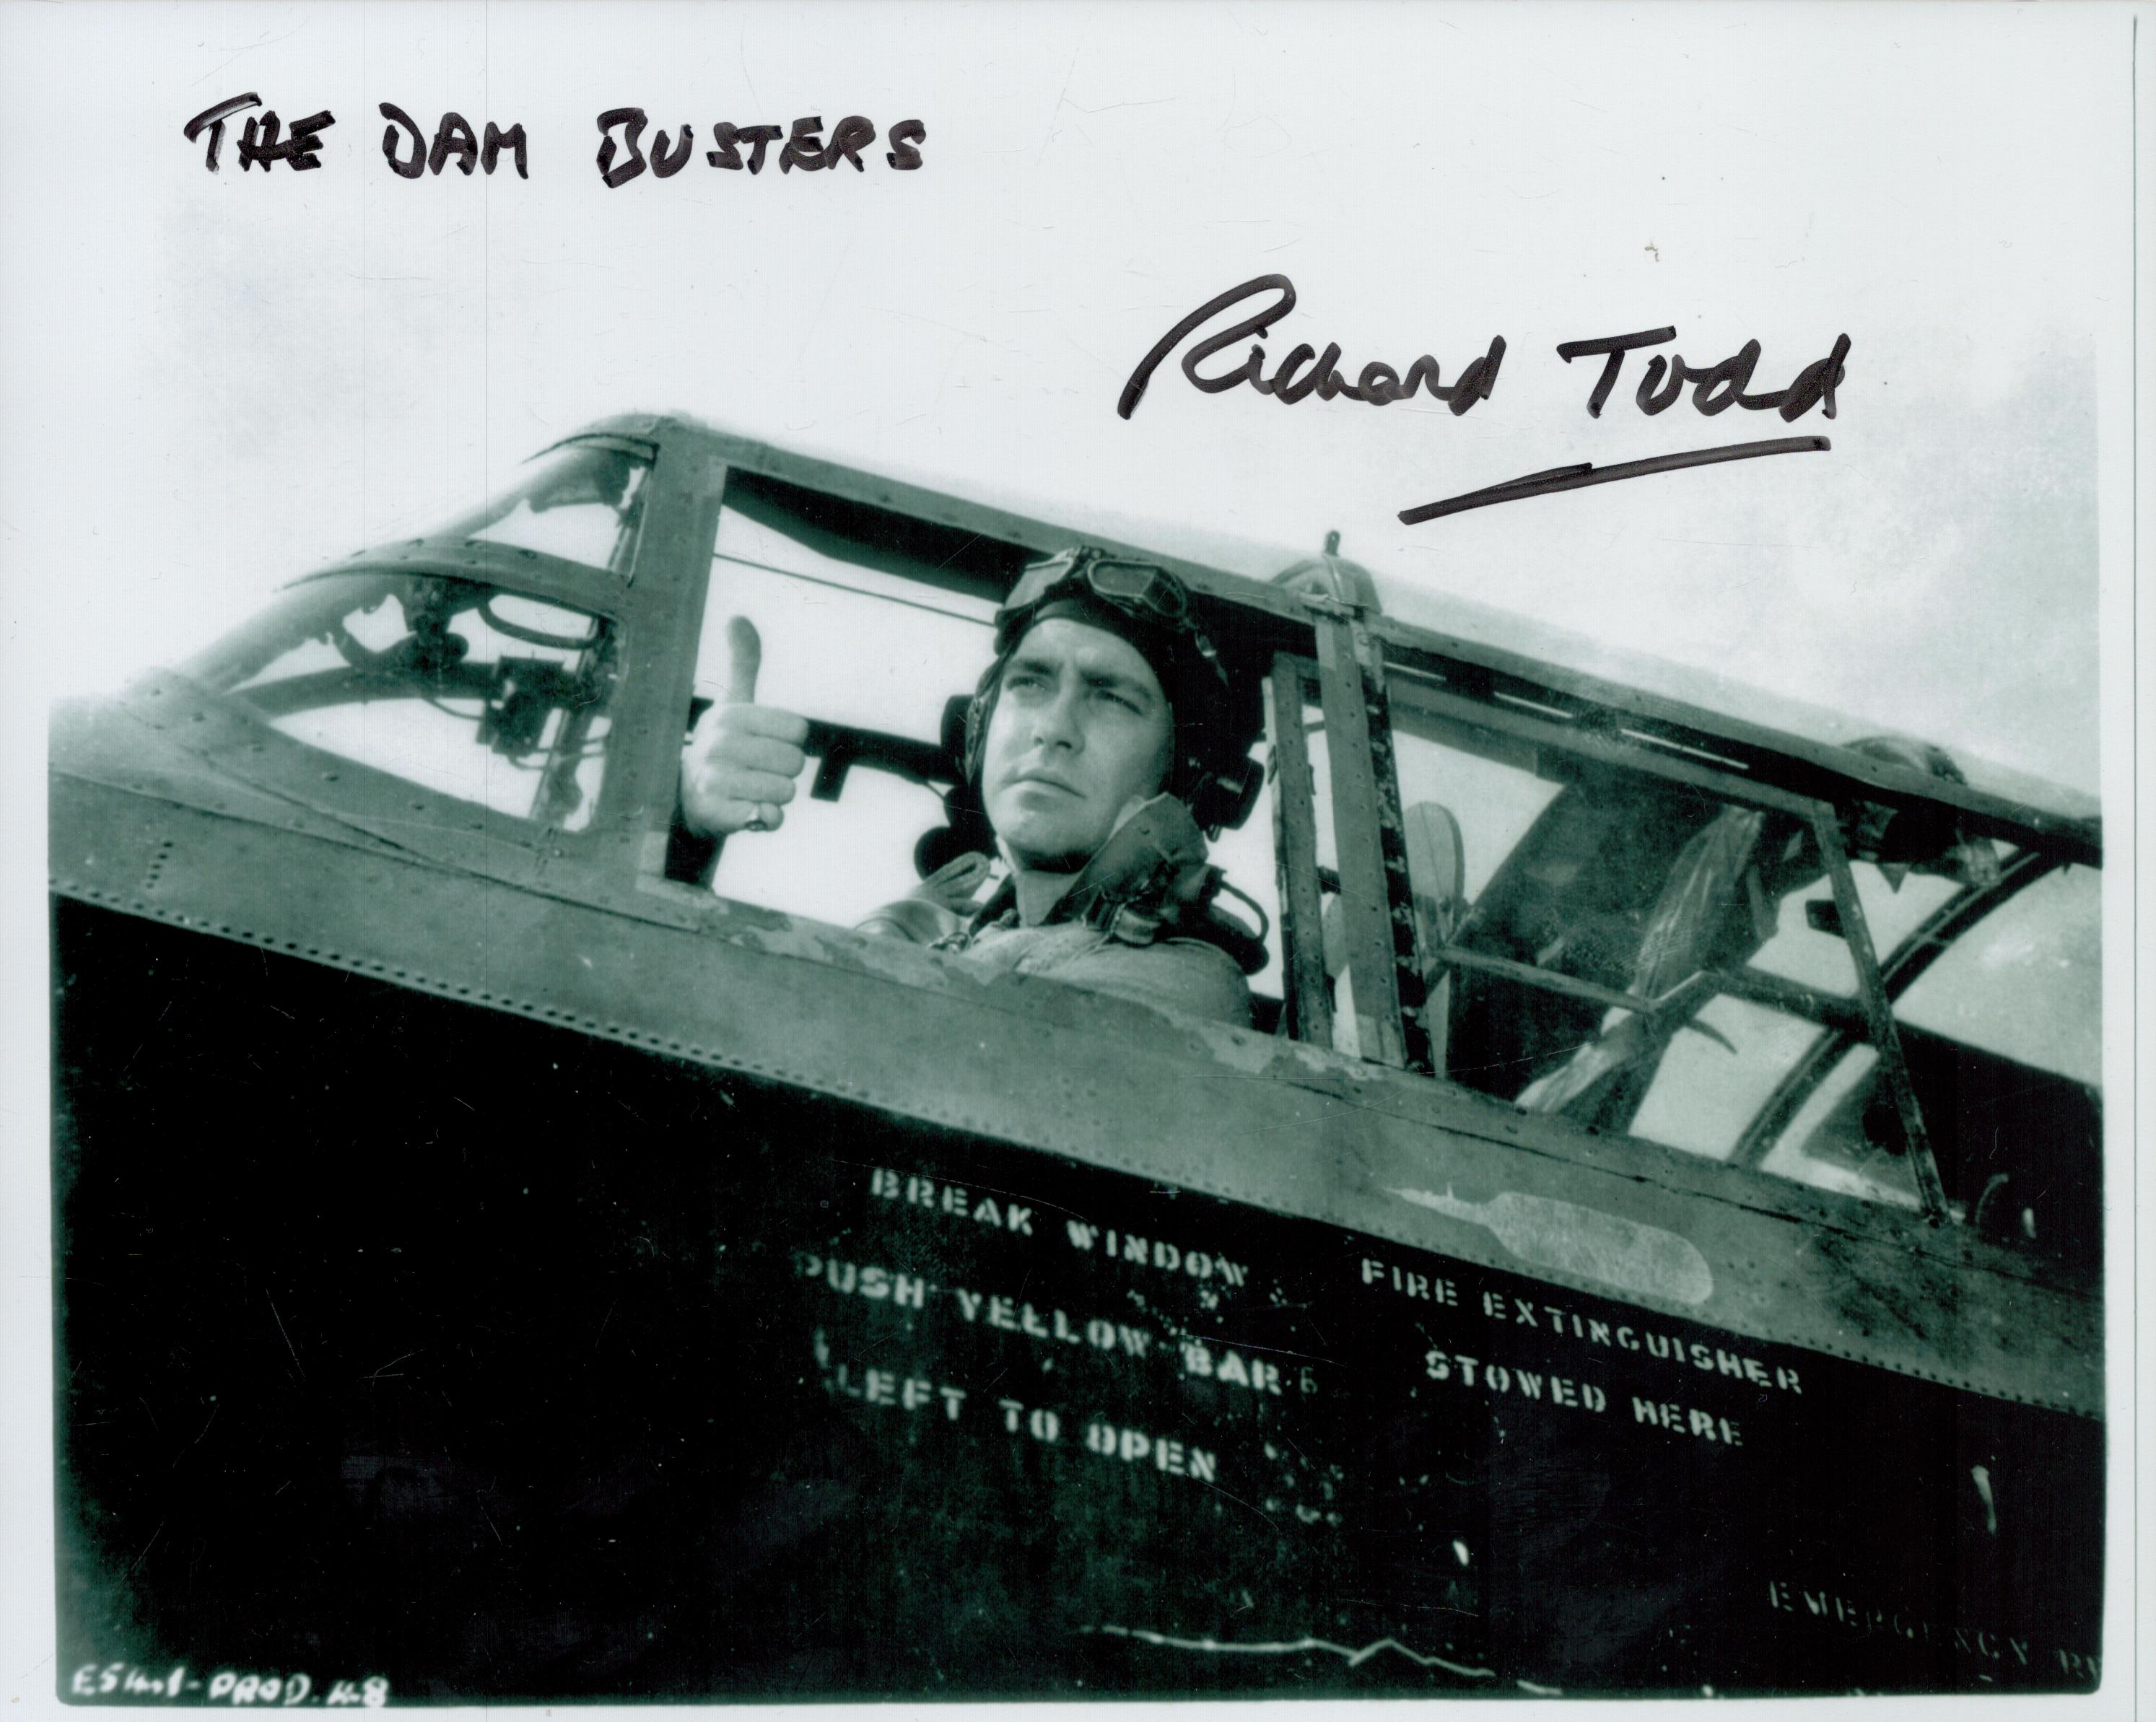 Richard Todd as Guy Gibson signed 10 x 8 inch b/w photo in Lancaster cockpit photo, rare inscribed